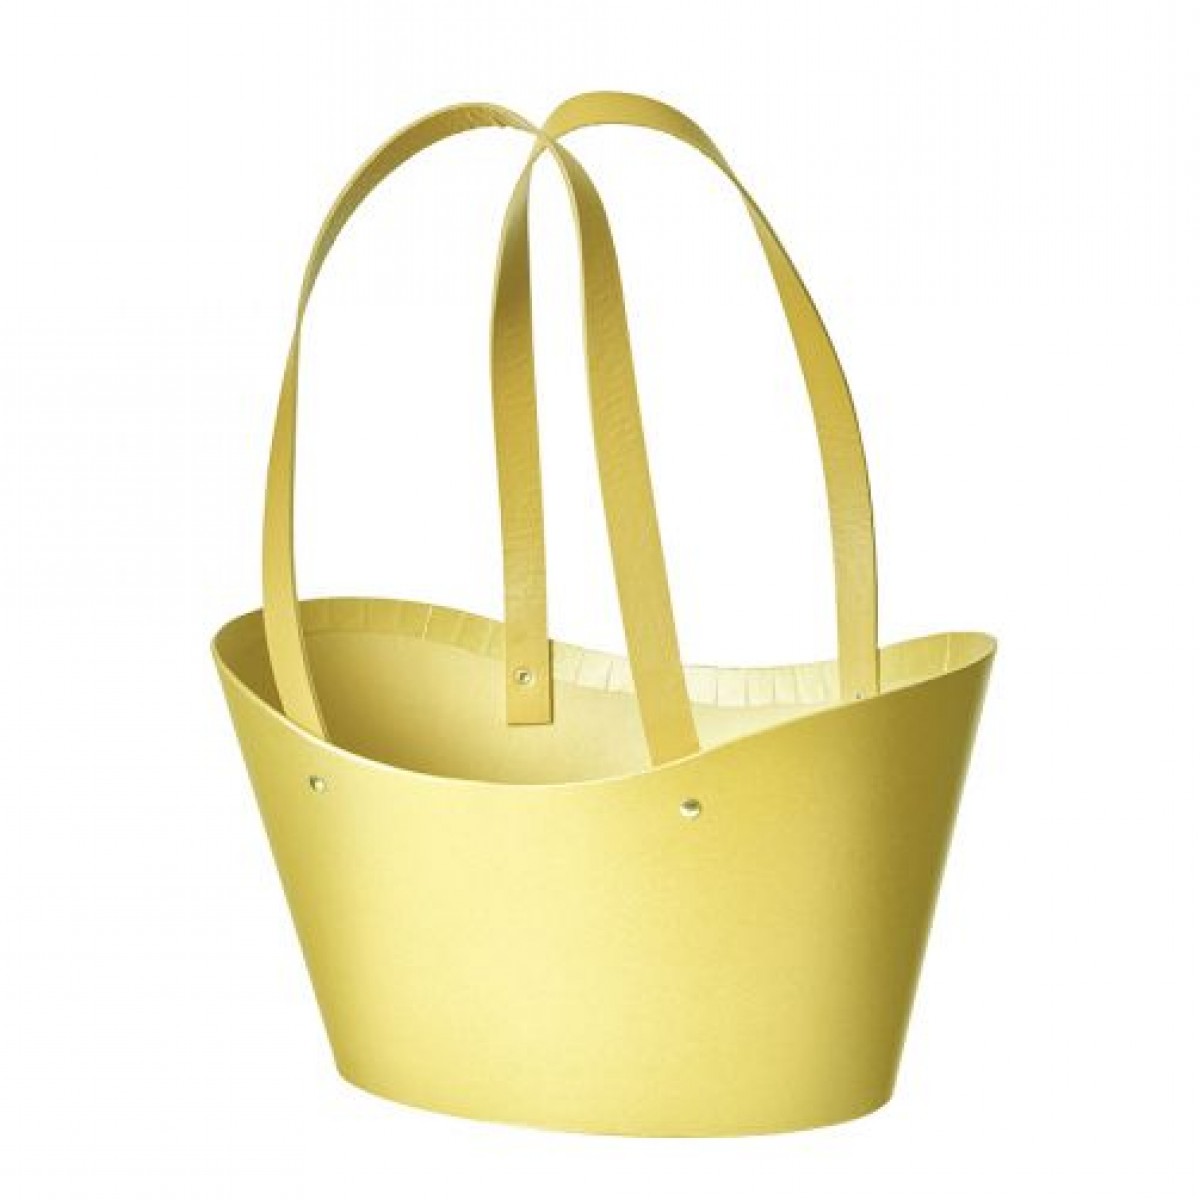 5061 Napier Basket Paper Lined Yellow (Pack of 3)